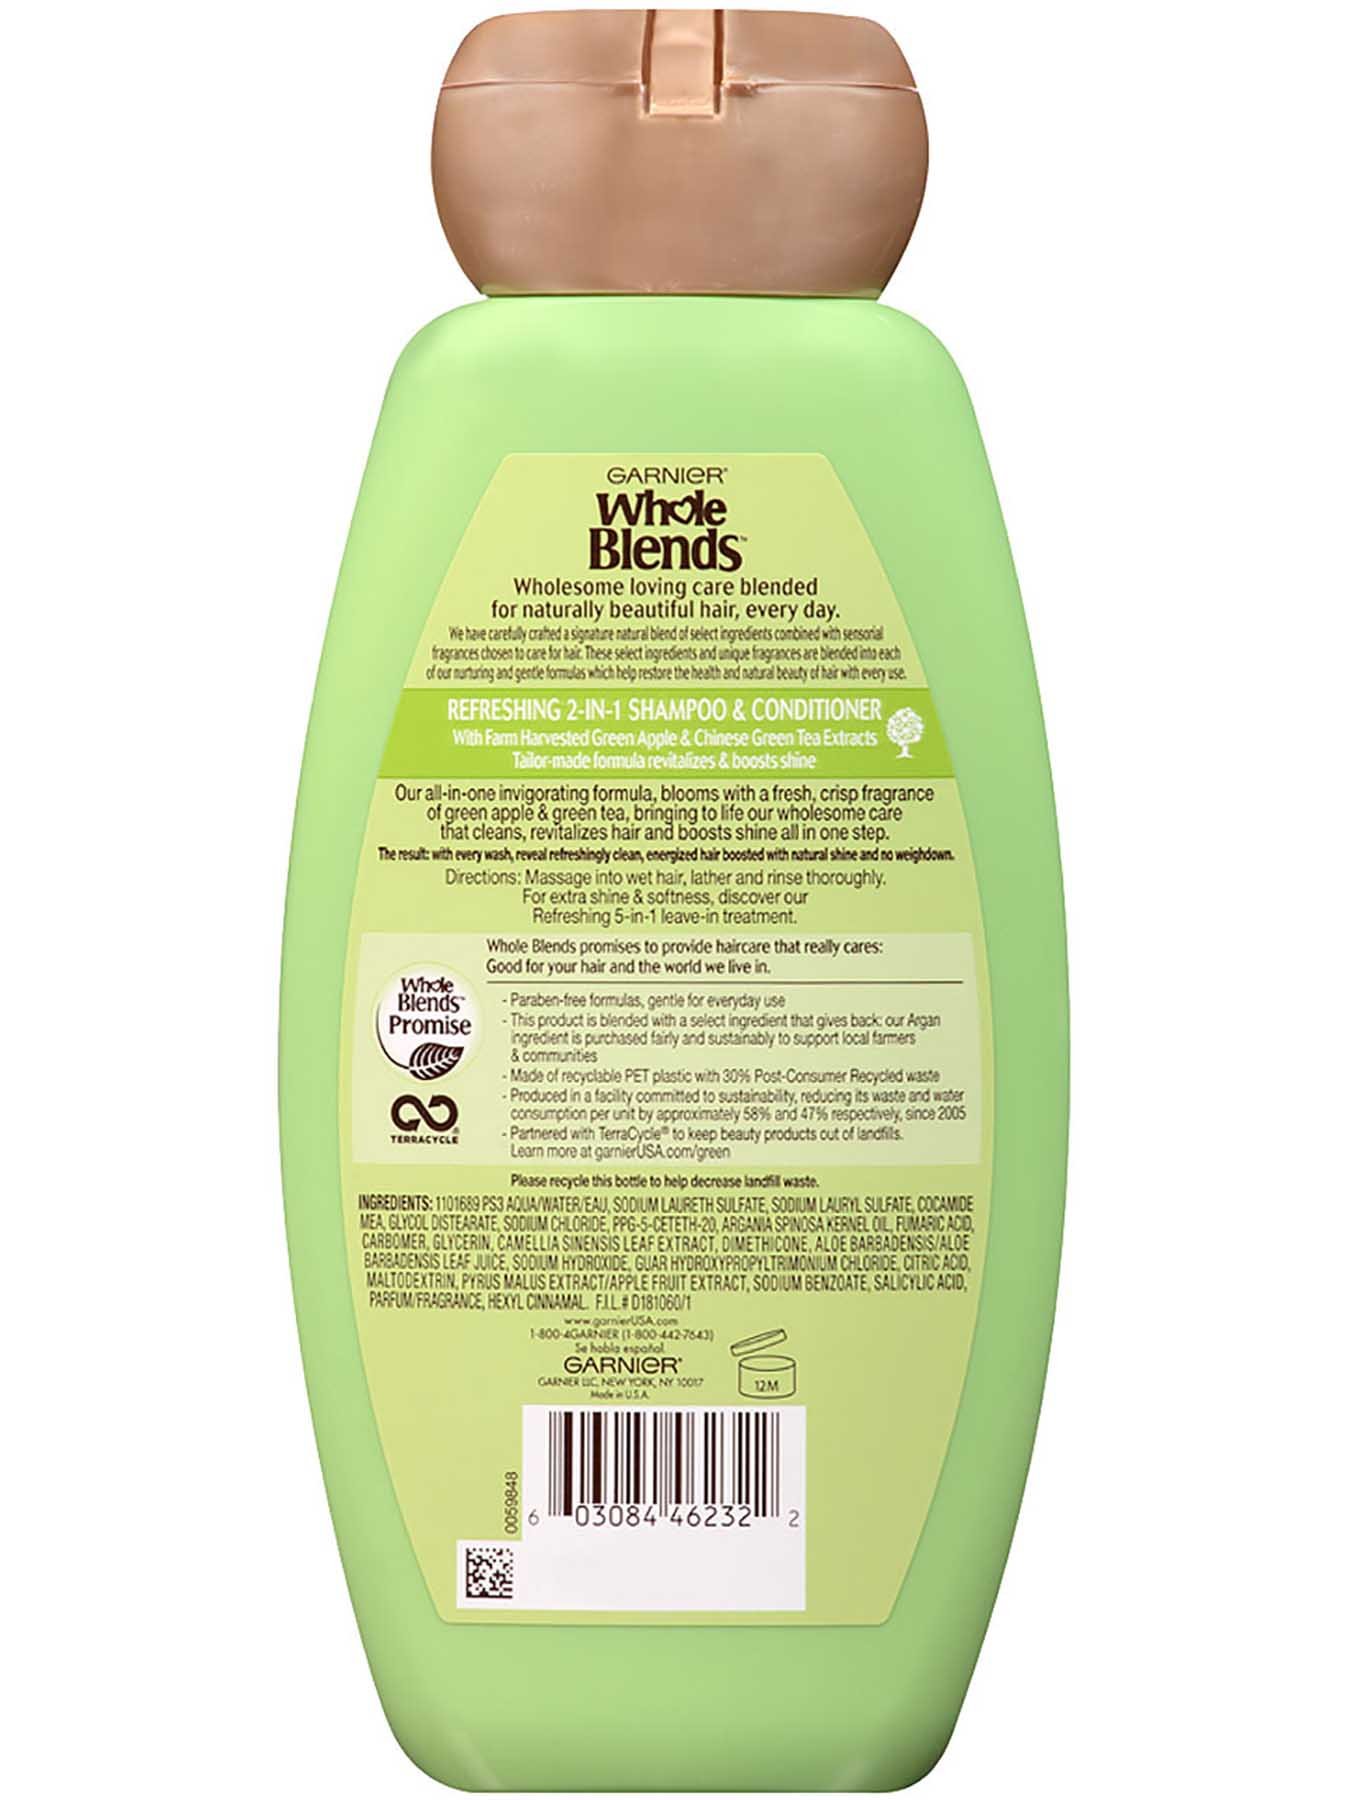 Back view of Refreshing 2-in-1 Shampoo with Green Apple & Green Tea extracts.